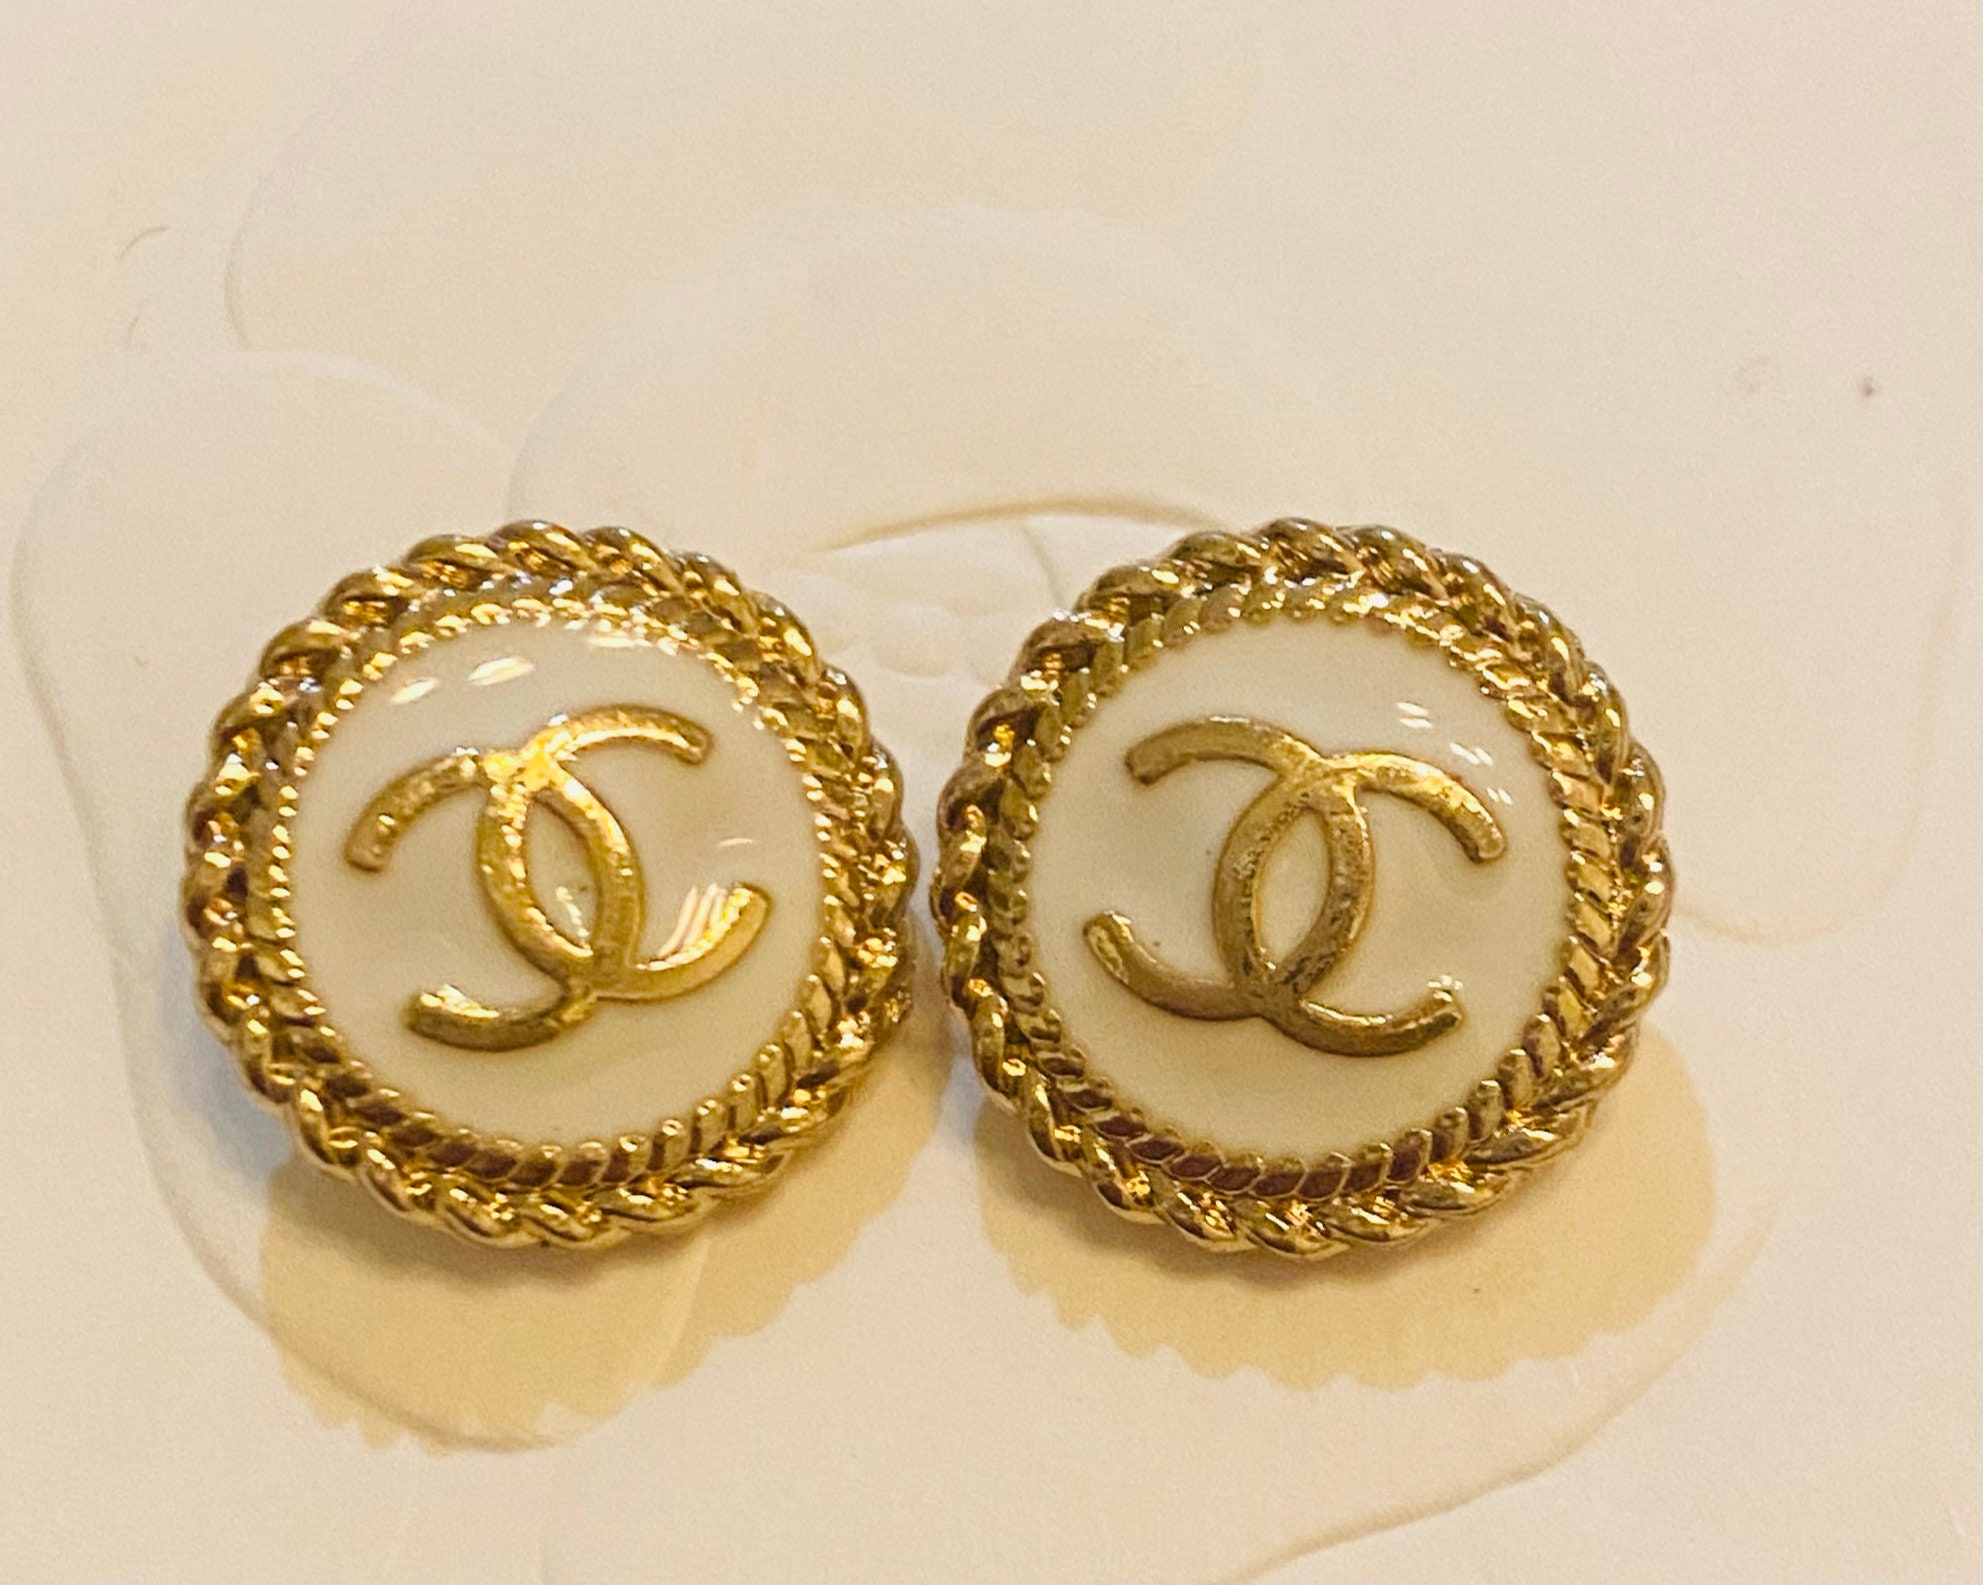 Chanel Buttons for sale | Only 2 left at -65%